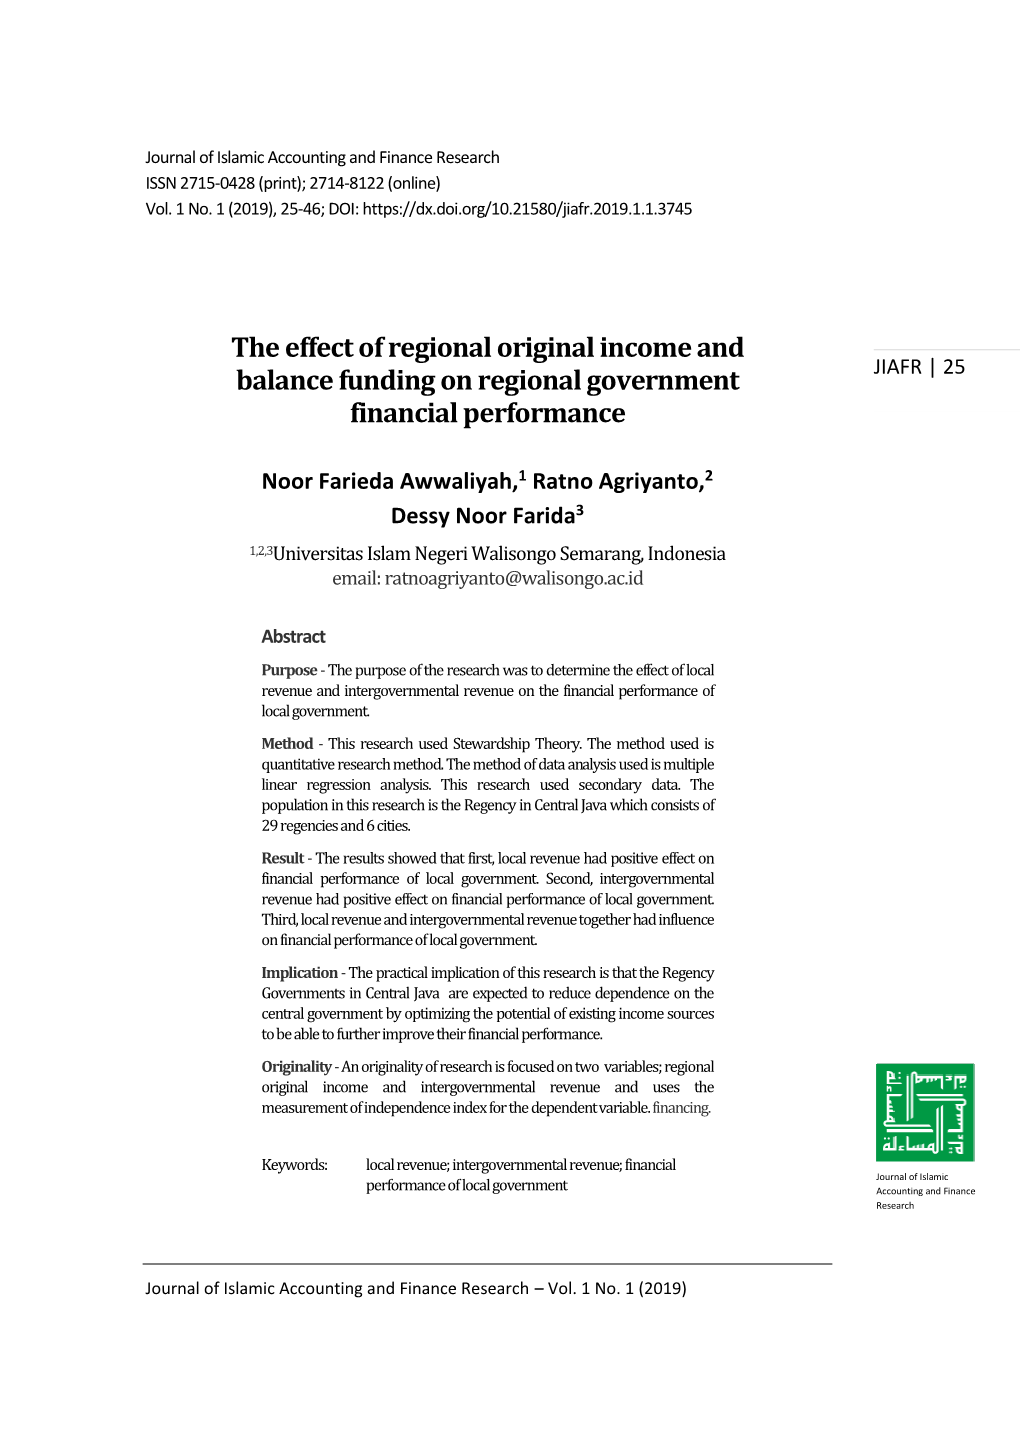 The Effect of Regional Original Income and Balance Funding on Regional